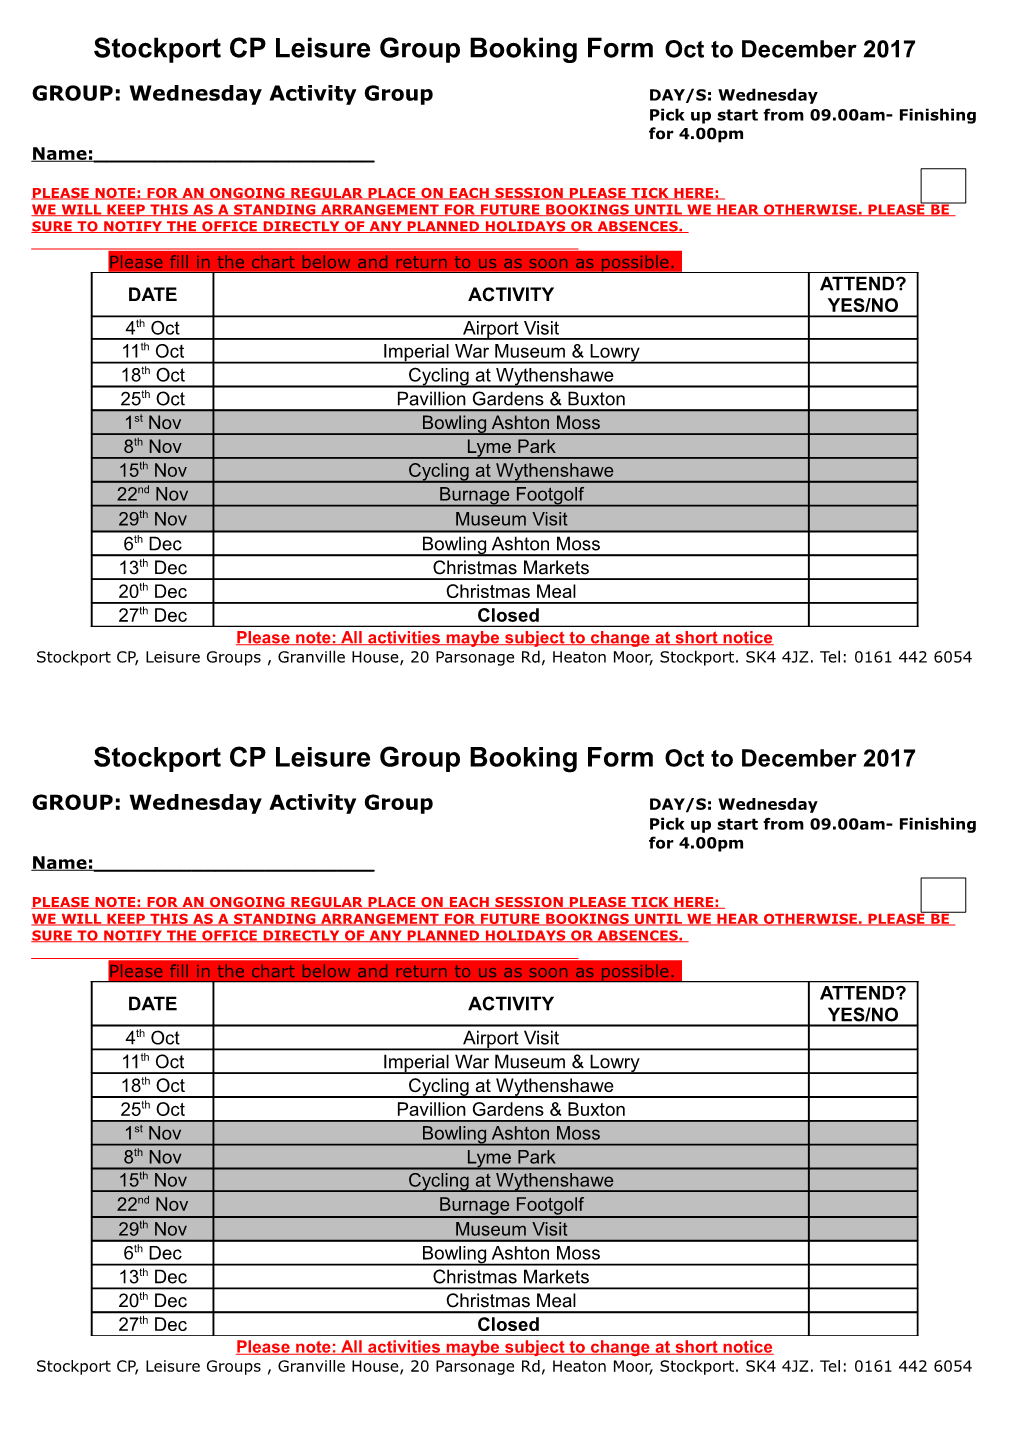 Stockport CP Leisure Group Booking Form Oct to December 2017